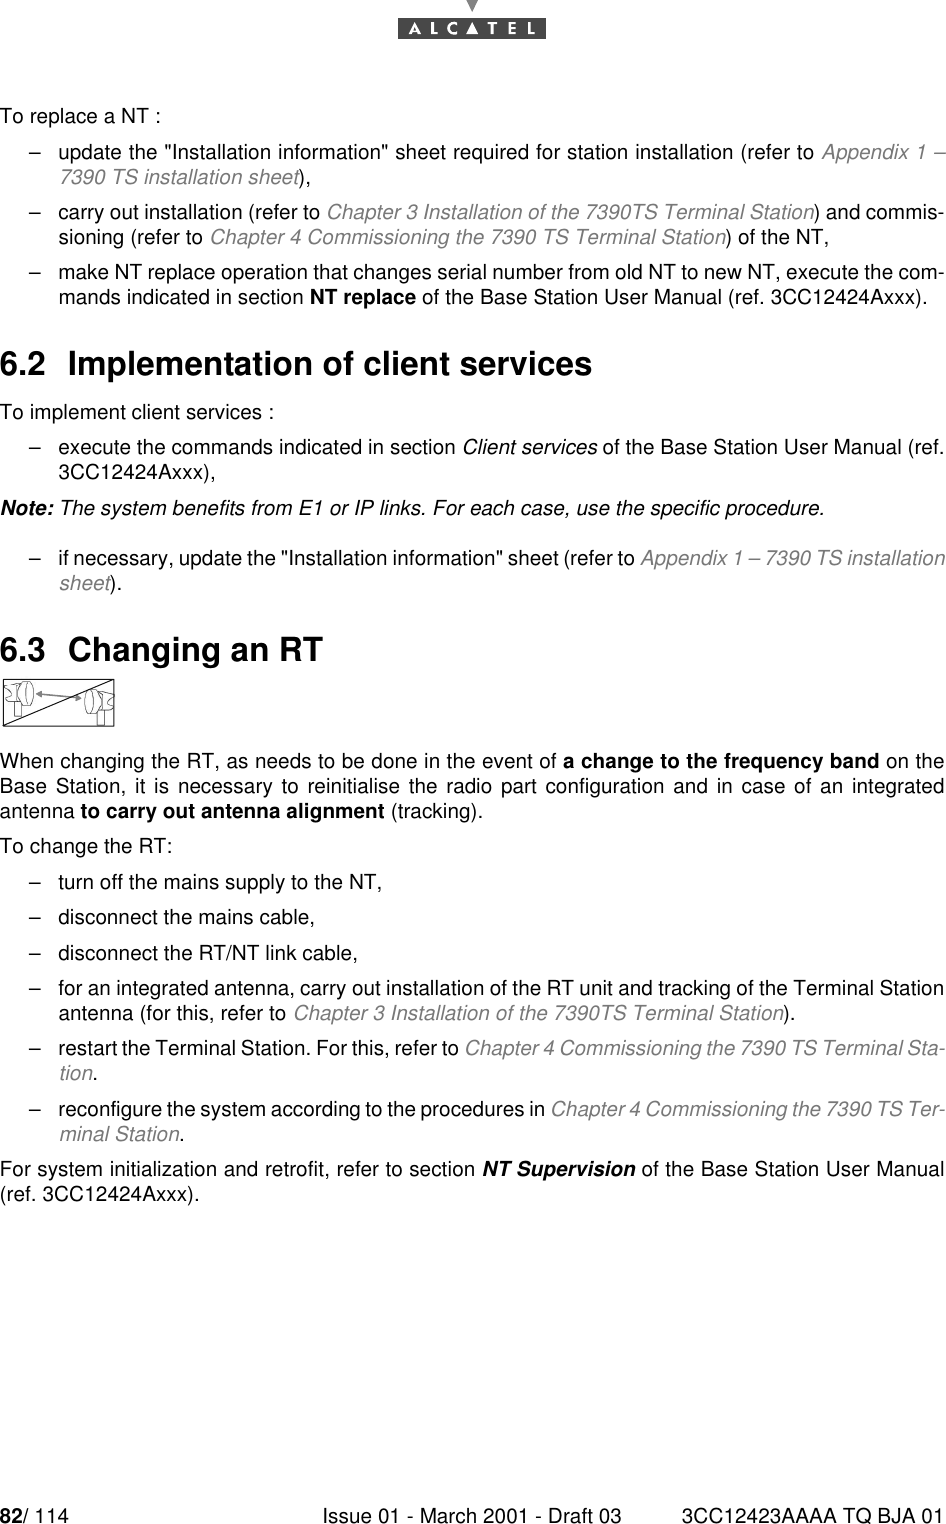 82/ 114 Issue 01 - March 2001 - Draft 03 3CC12423AAAA TQ BJA 0184To replace a NT :–update the &quot;Installation information&quot; sheet required for station installation (refer to Appendix 1 –7390 TS installation sheet),–carry out installation (refer to Chapter 3 Installation of the 7390TS Terminal Station) and commis-sioning (refer to Chapter 4 Commissioning the 7390 TS Terminal Station) of the NT,–make NT replace operation that changes serial number from old NT to new NT, execute the com-mands indicated in section NT replace of the Base Station User Manual (ref. 3CC12424Axxx).6.2  Implementation of client servicesTo implement client services :–execute the commands indicated in section Client services of the Base Station User Manual (ref.3CC12424Axxx),Note: The system benefits from E1 or IP links. For each case, use the specific procedure.–if necessary, update the &quot;Installation information&quot; sheet (refer to Appendix 1 – 7390 TS installationsheet).6.3  Changing an RTWhen changing the RT, as needs to be done in the event of a change to the frequency band on theBase Station, it is necessary to reinitialise the radio part configuration and in case of an integratedantenna to carry out antenna alignment (tracking).To change the RT:–turn off the mains supply to the NT,–disconnect the mains cable,–disconnect the RT/NT link cable,–for an integrated antenna, carry out installation of the RT unit and tracking of the Terminal Stationantenna (for this, refer to Chapter 3 Installation of the 7390TS Terminal Station).–restart the Terminal Station. For this, refer to Chapter 4 Commissioning the 7390 TS Terminal Sta-tion.–reconfigure the system according to the procedures in Chapter 4 Commissioning the 7390 TS Ter-minal Station.For system initialization and retrofit, refer to section NT Supervision of the Base Station User Manual(ref. 3CC12424Axxx).